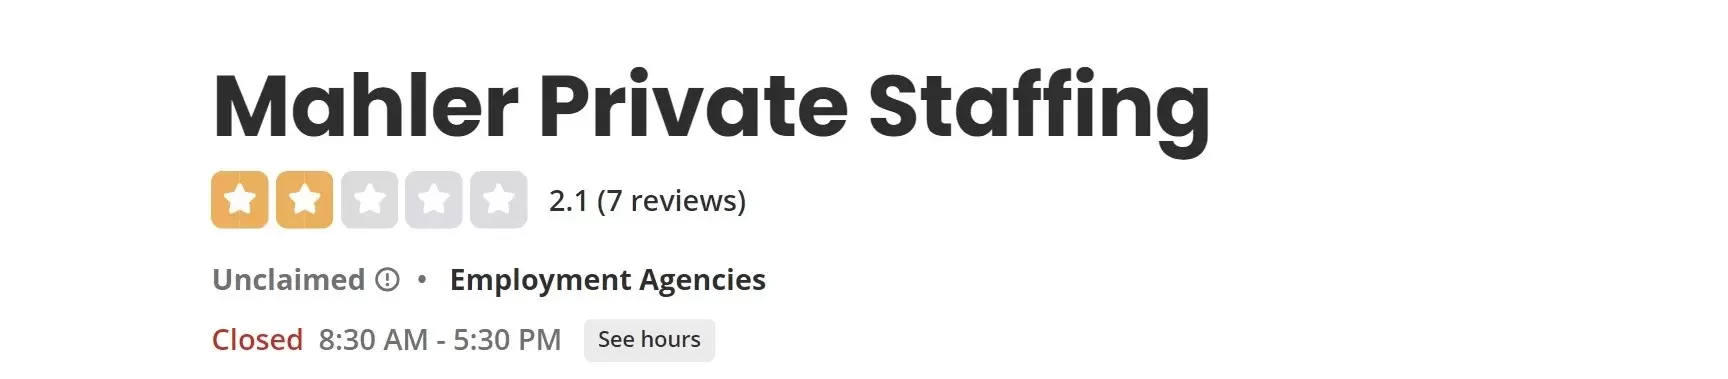 Mahler Private Staffing on Yelp